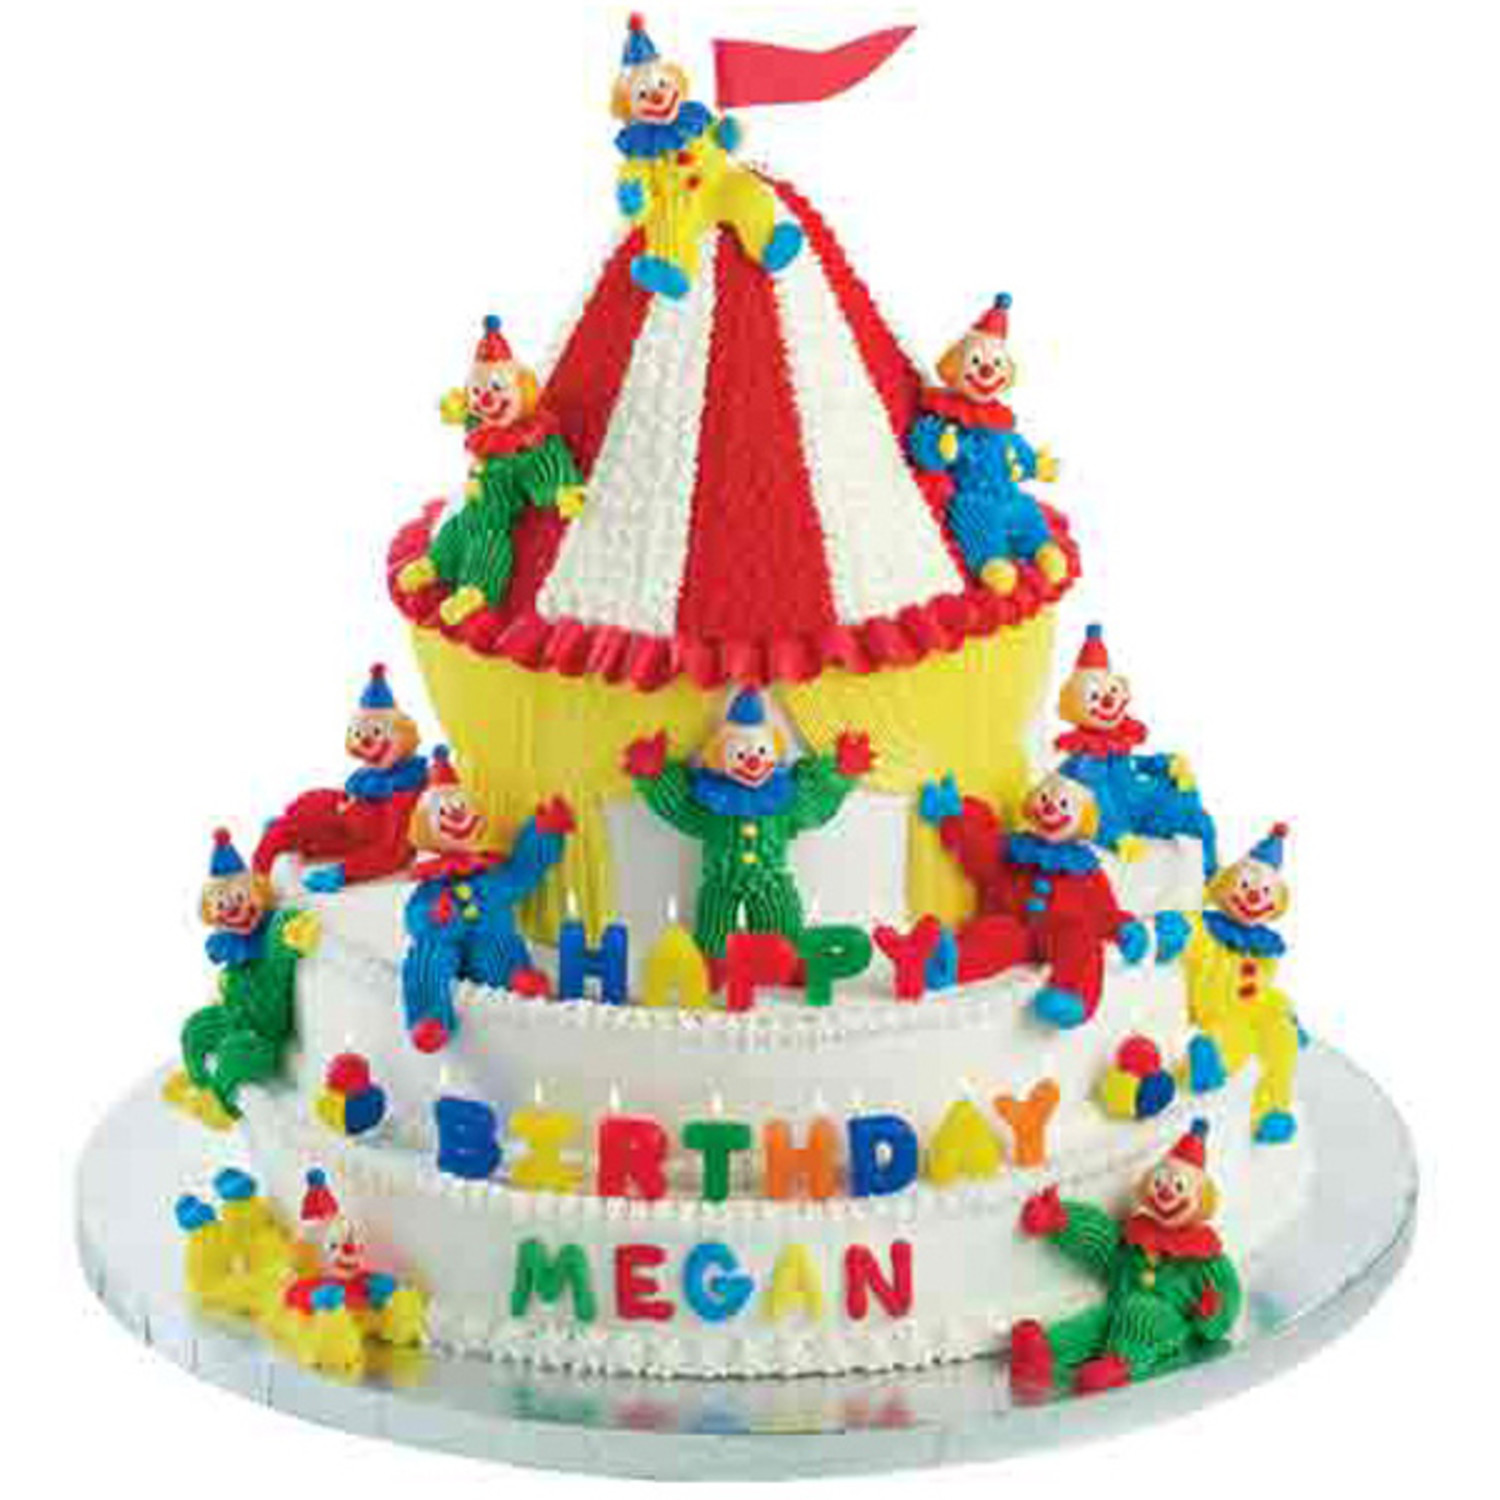 Come Join This Circus Cake